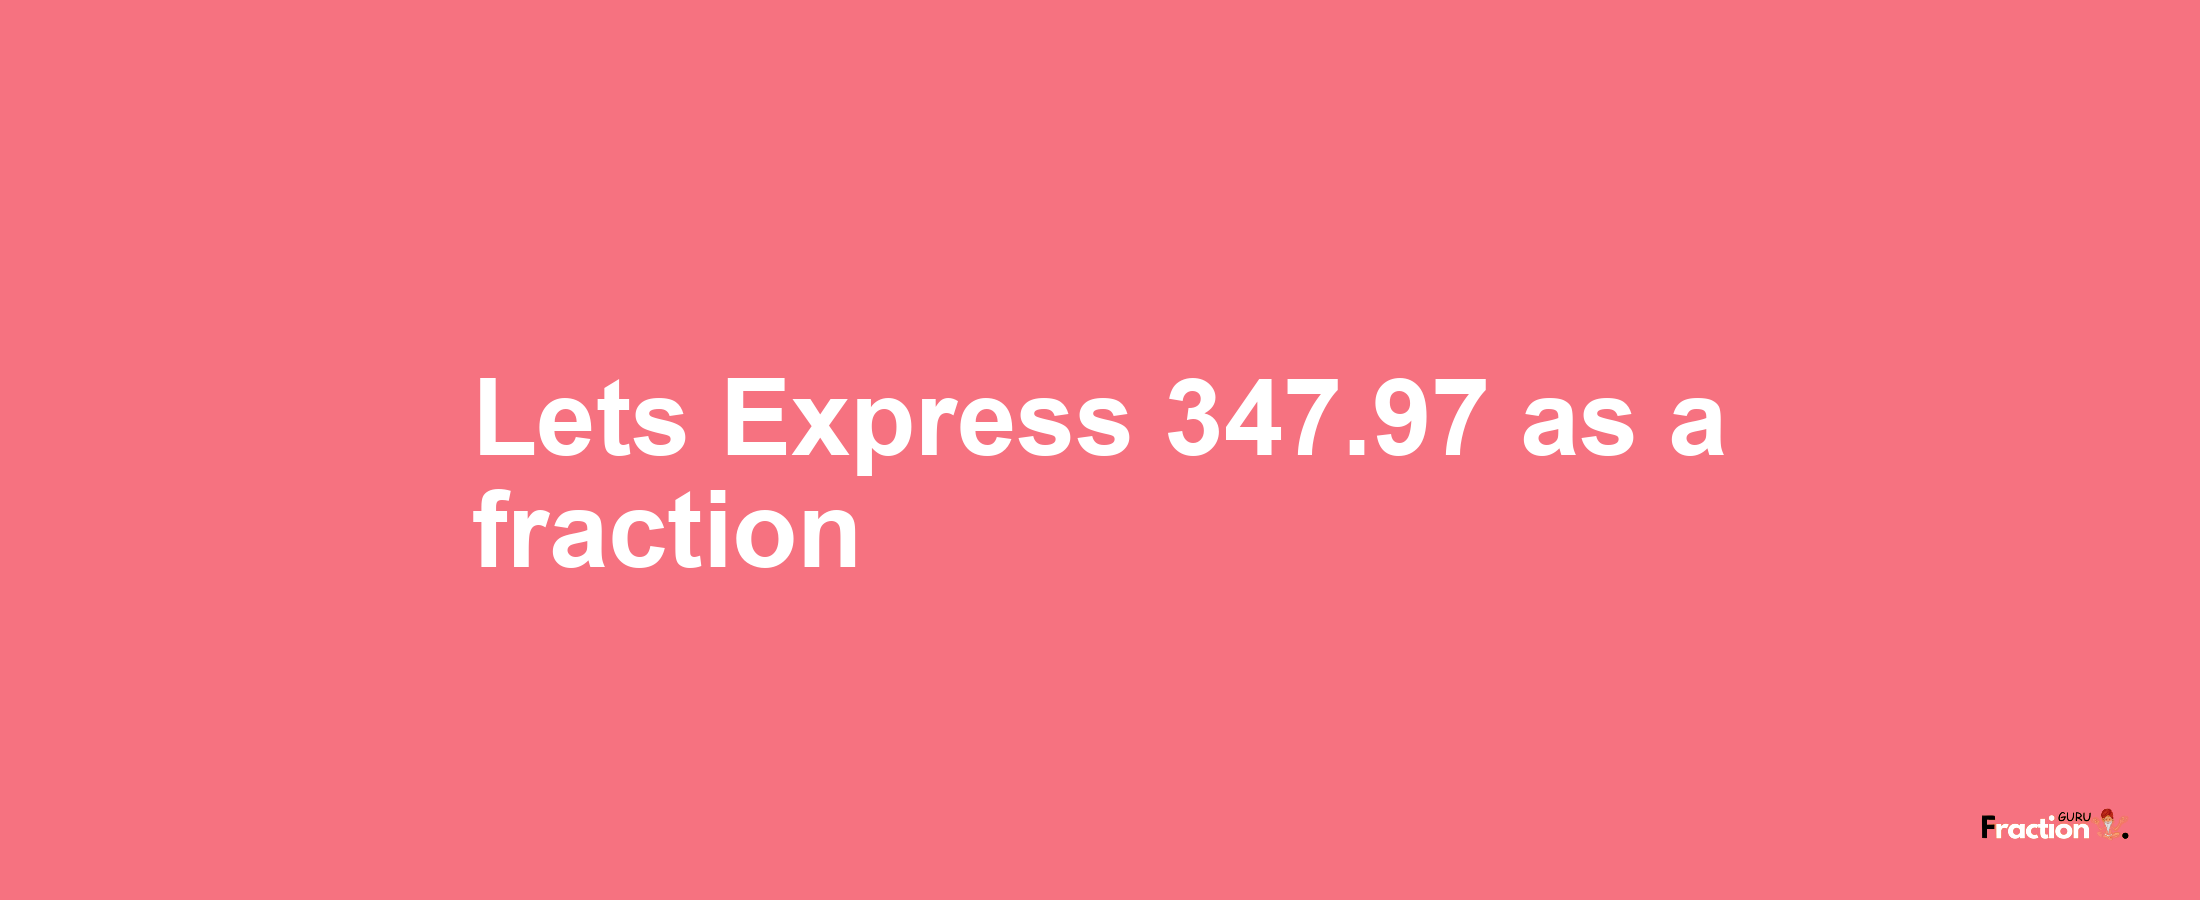 Lets Express 347.97 as afraction